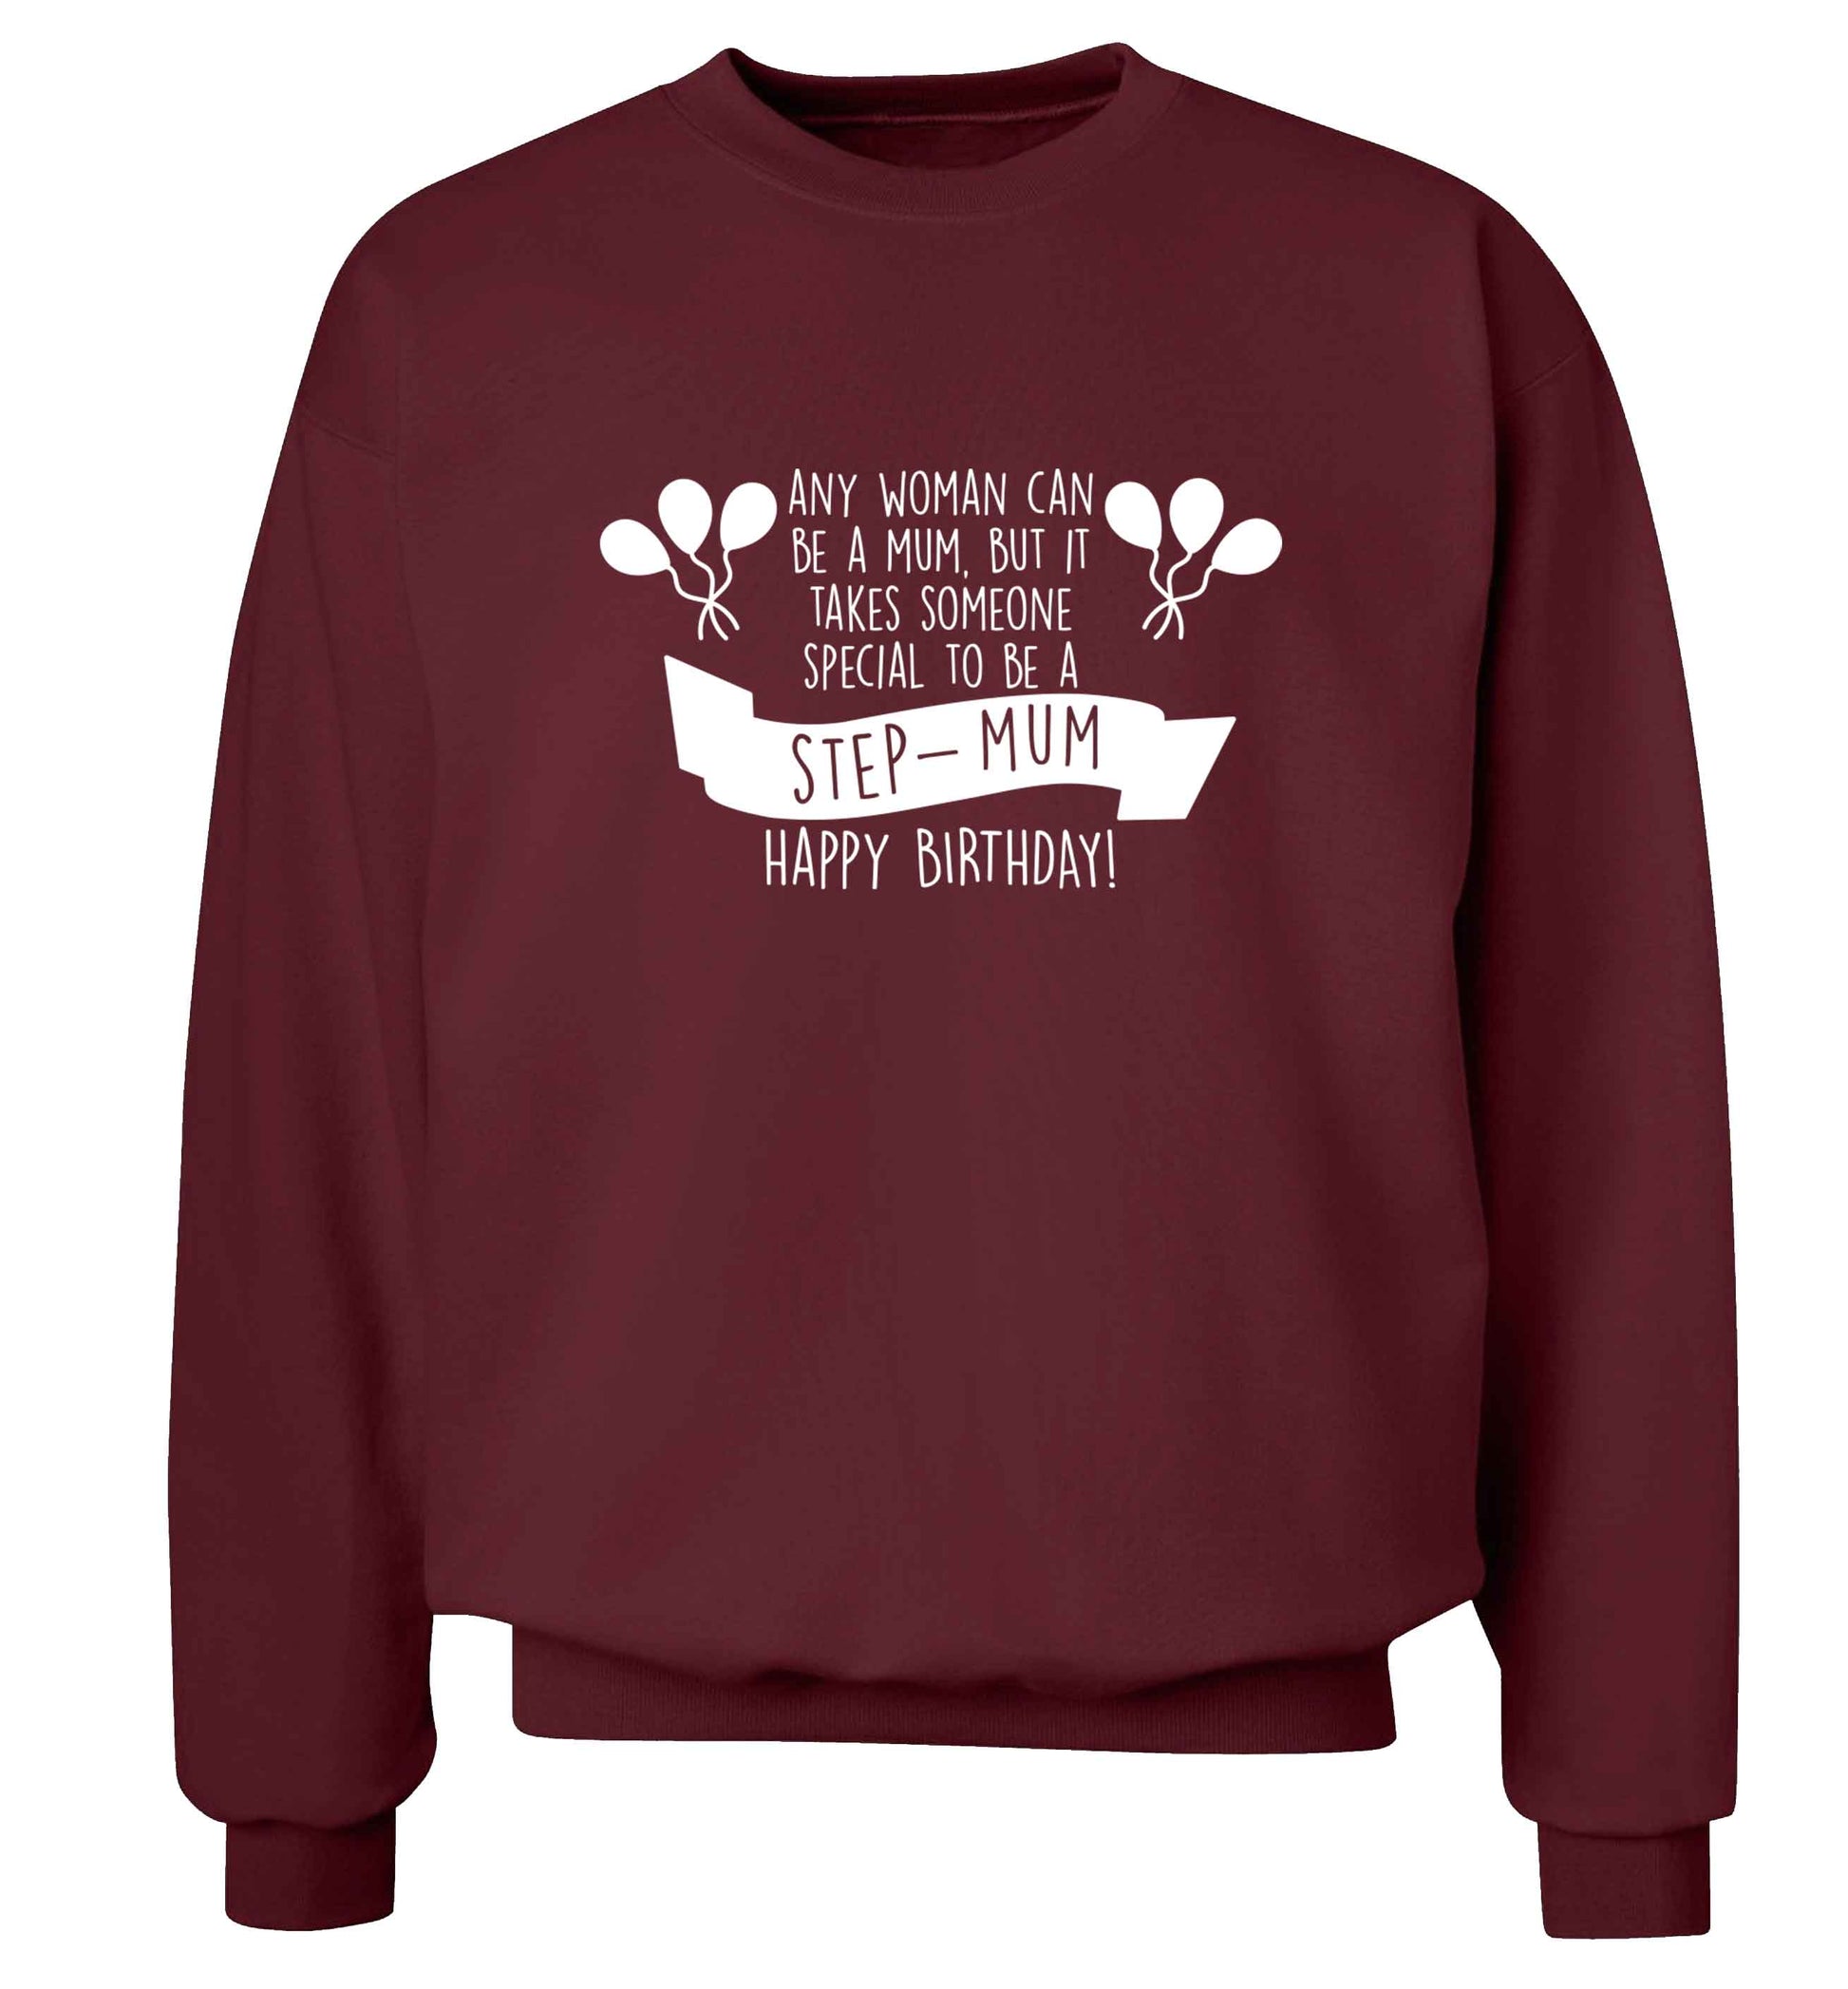 Takes someone special to be a step-mum, happy birthday! adult's unisex maroon sweater 2XL